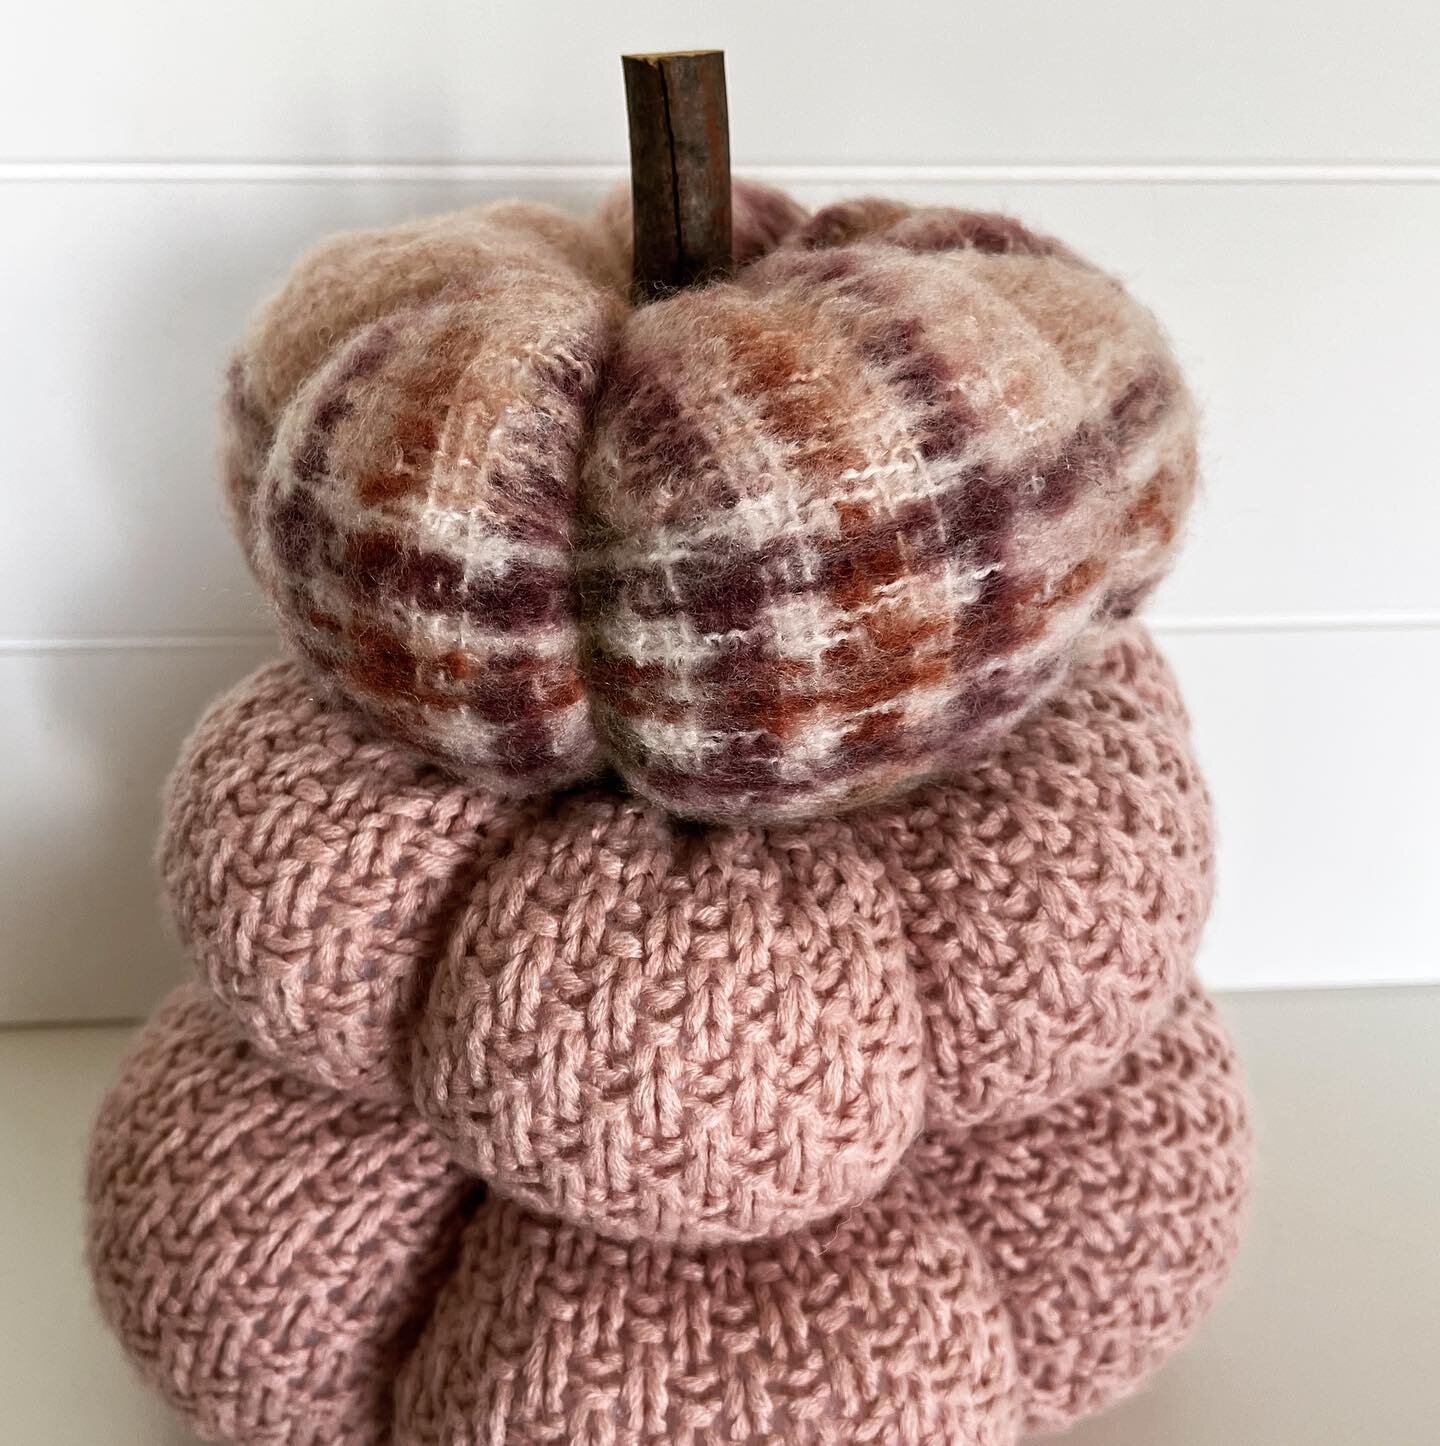 We are making some fabric pumpkins out of old sweaters today. 

I love the look of these fluffy, flat pumpkins. 

It&rsquo;s such a fun, easy process!! I will share the how-to in a reel sometime this week yet. 

The top, plaid pumpkin is from an old 